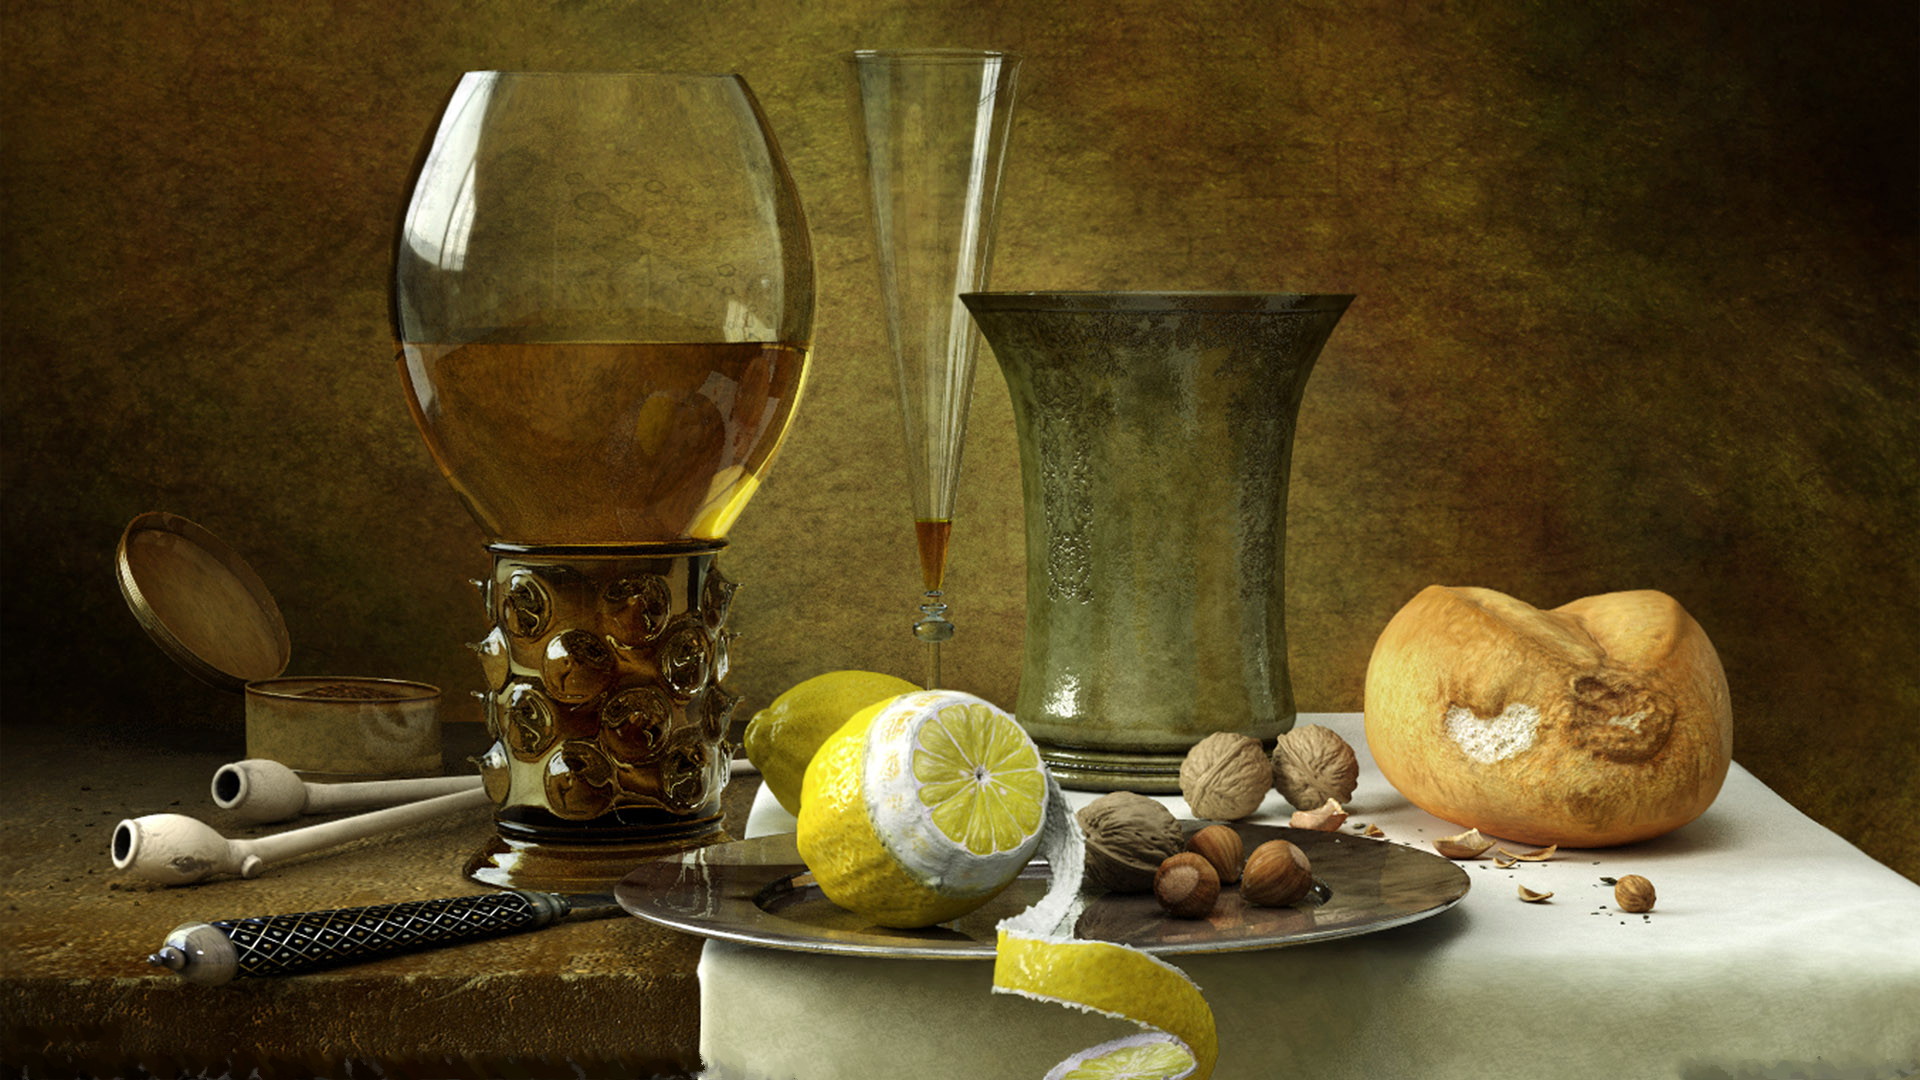 Still life with lemon and almond food and drink wallpaper.